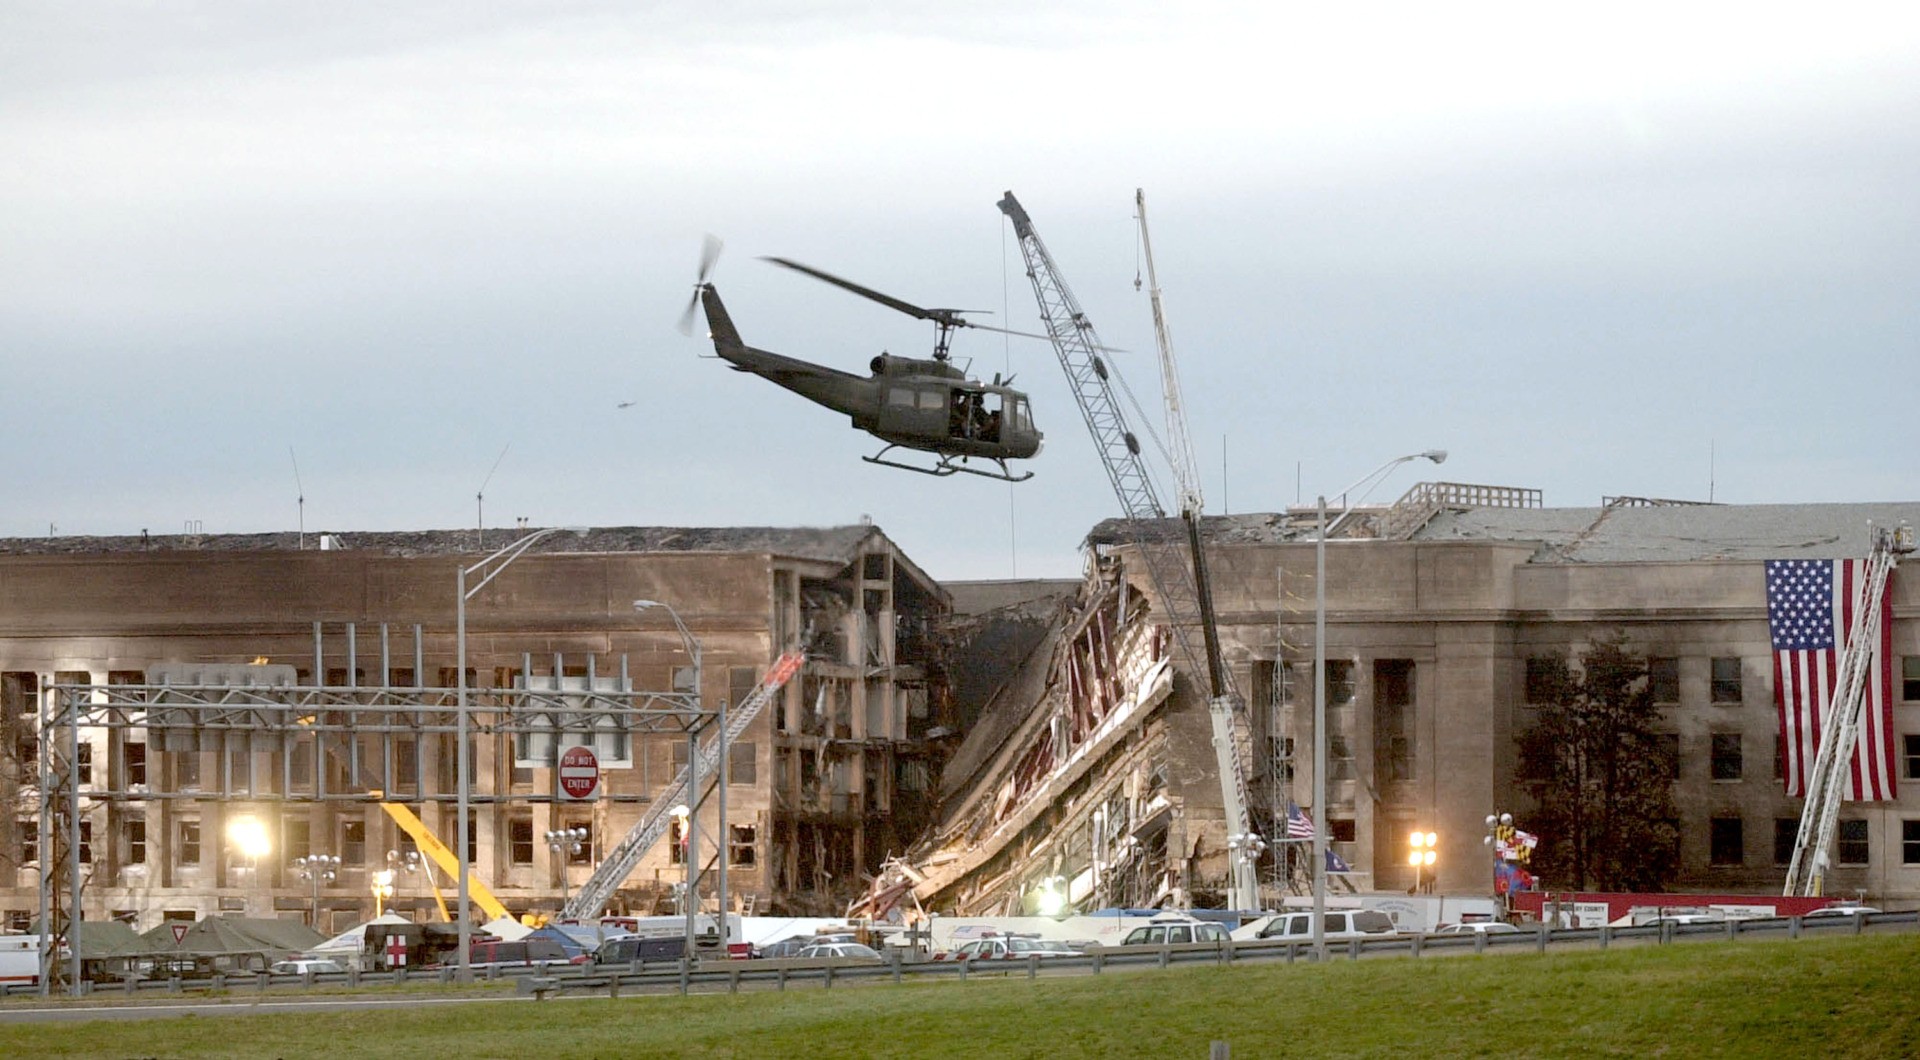 ARLINGTON, VA - SEPTEMBER 14, 2001: (SEPTEMBER 11 RETROSPECTIVE) A military helicopter flies in front of the Pentagon September 14, 2001 in Arlington, Virginia at the impact site where a hijacked airliner crashed into the building. (Photo by Stephen J. Boitano/Getty Images)